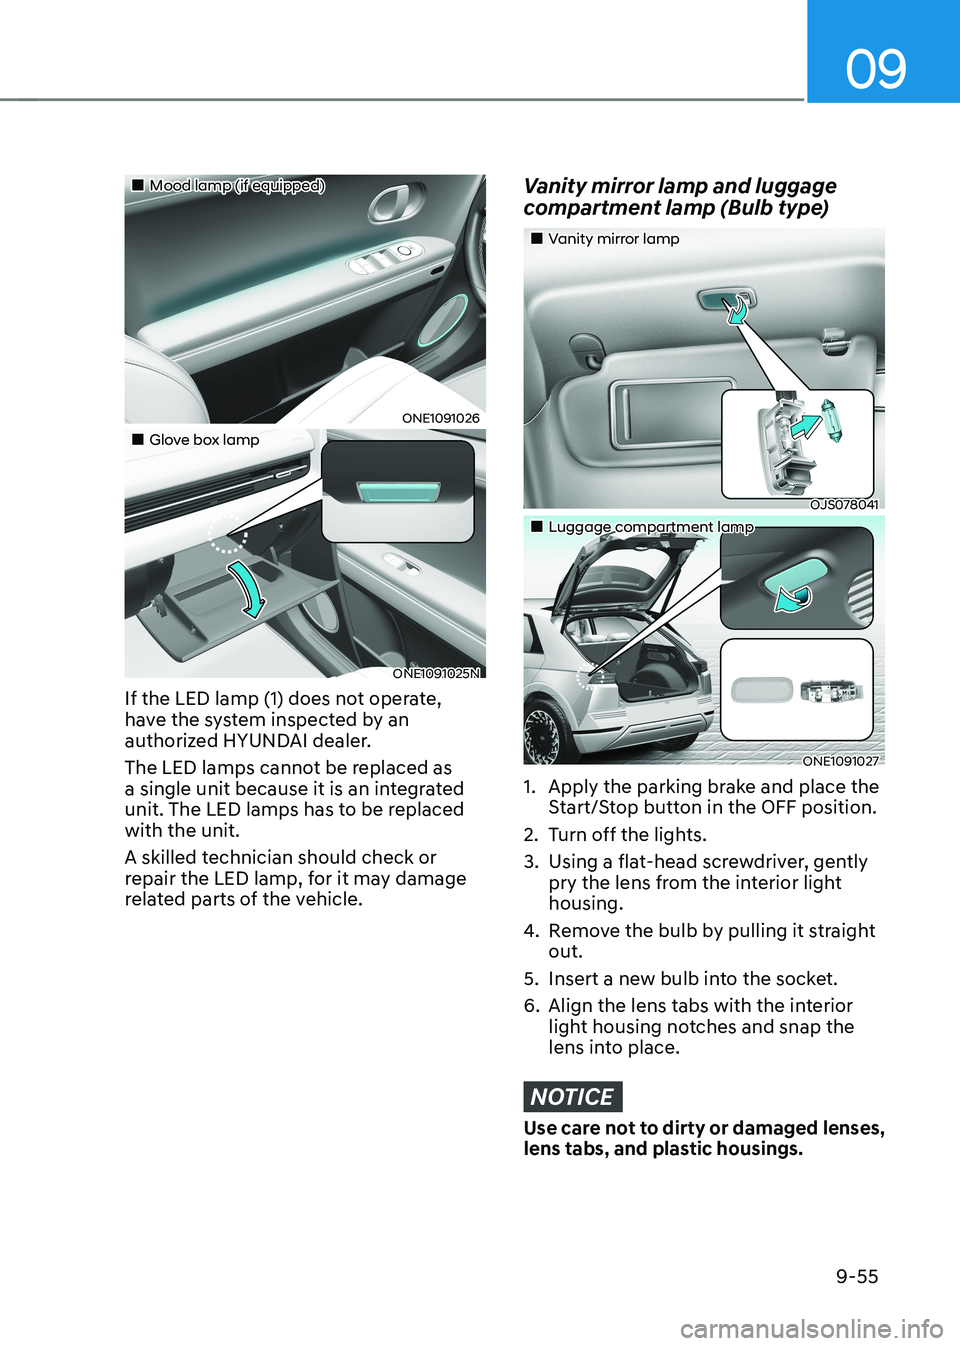 HYUNDAI IONIQ 5 2023  Owners Manual 09
9-55
„„Mood lamp (if equipped)
ONE1091026 
„„Glove box lamp
ONE1091025N 
If the LED lamp (1) does not operate,  
have the system inspected by an 
authorized HYUNDAI dealer. 
The